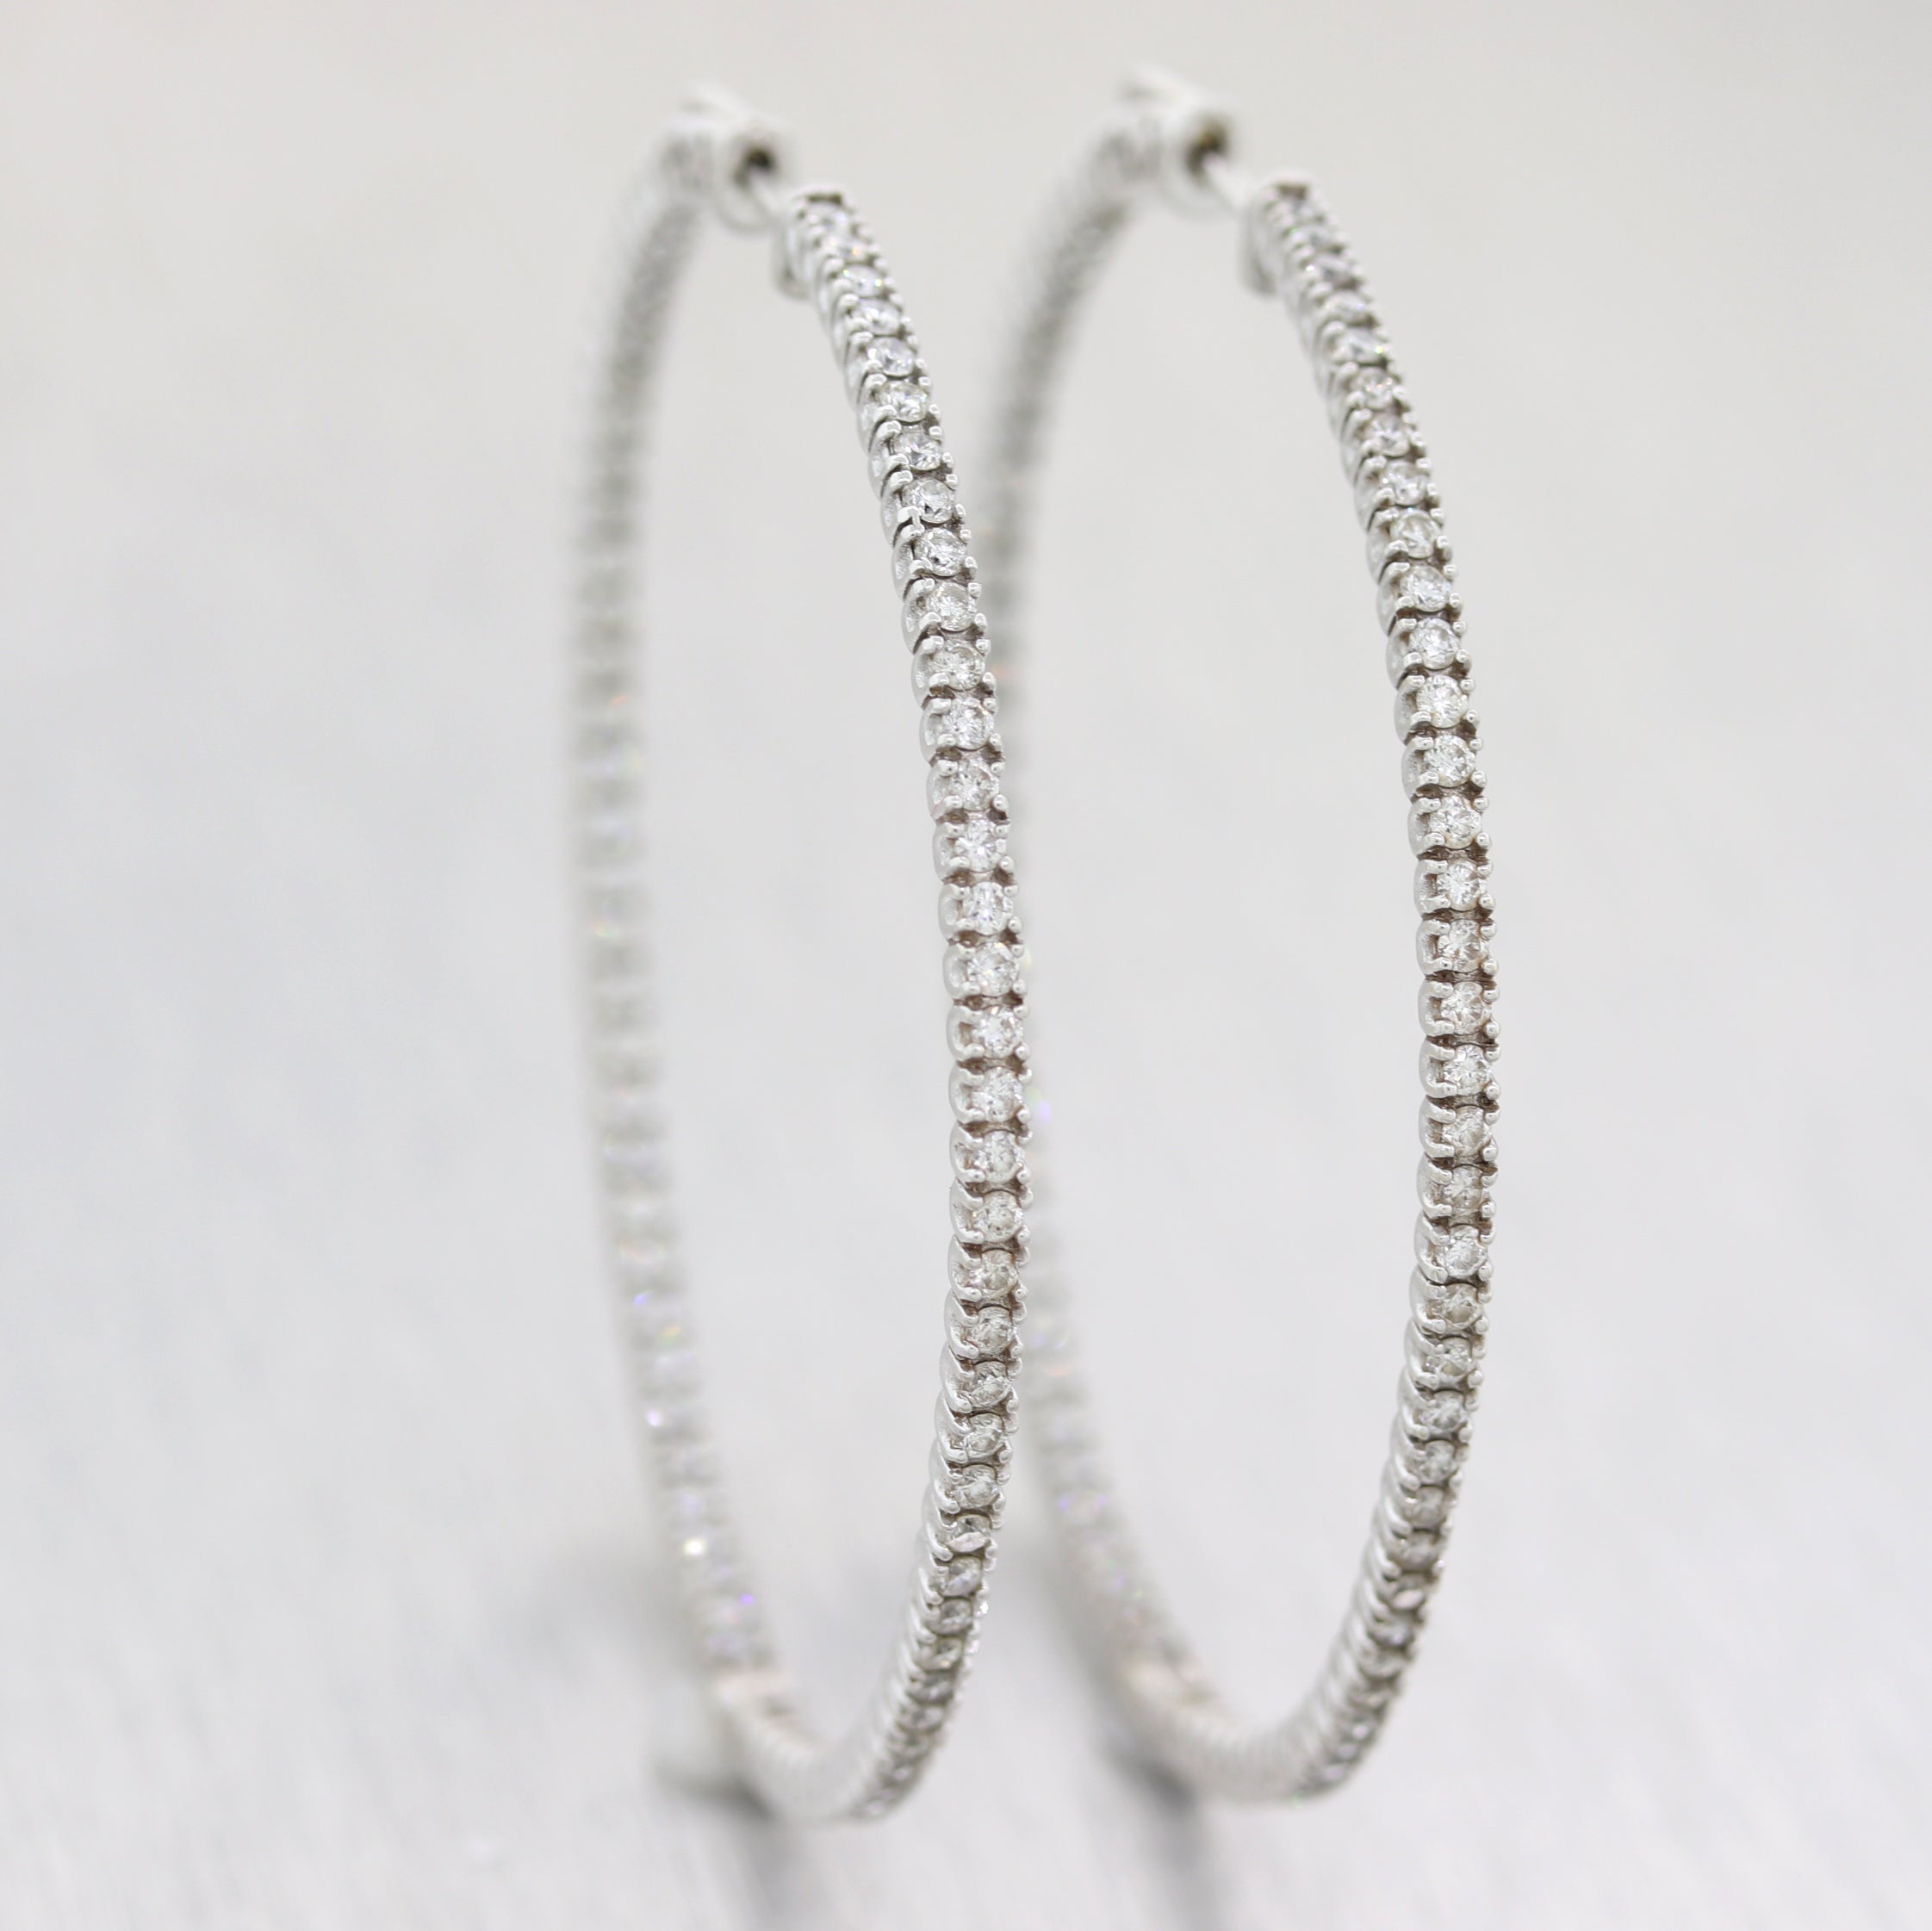 Modern 14k White Gold Extra Large 3ctw Diamond In & Out Hoop Earrings